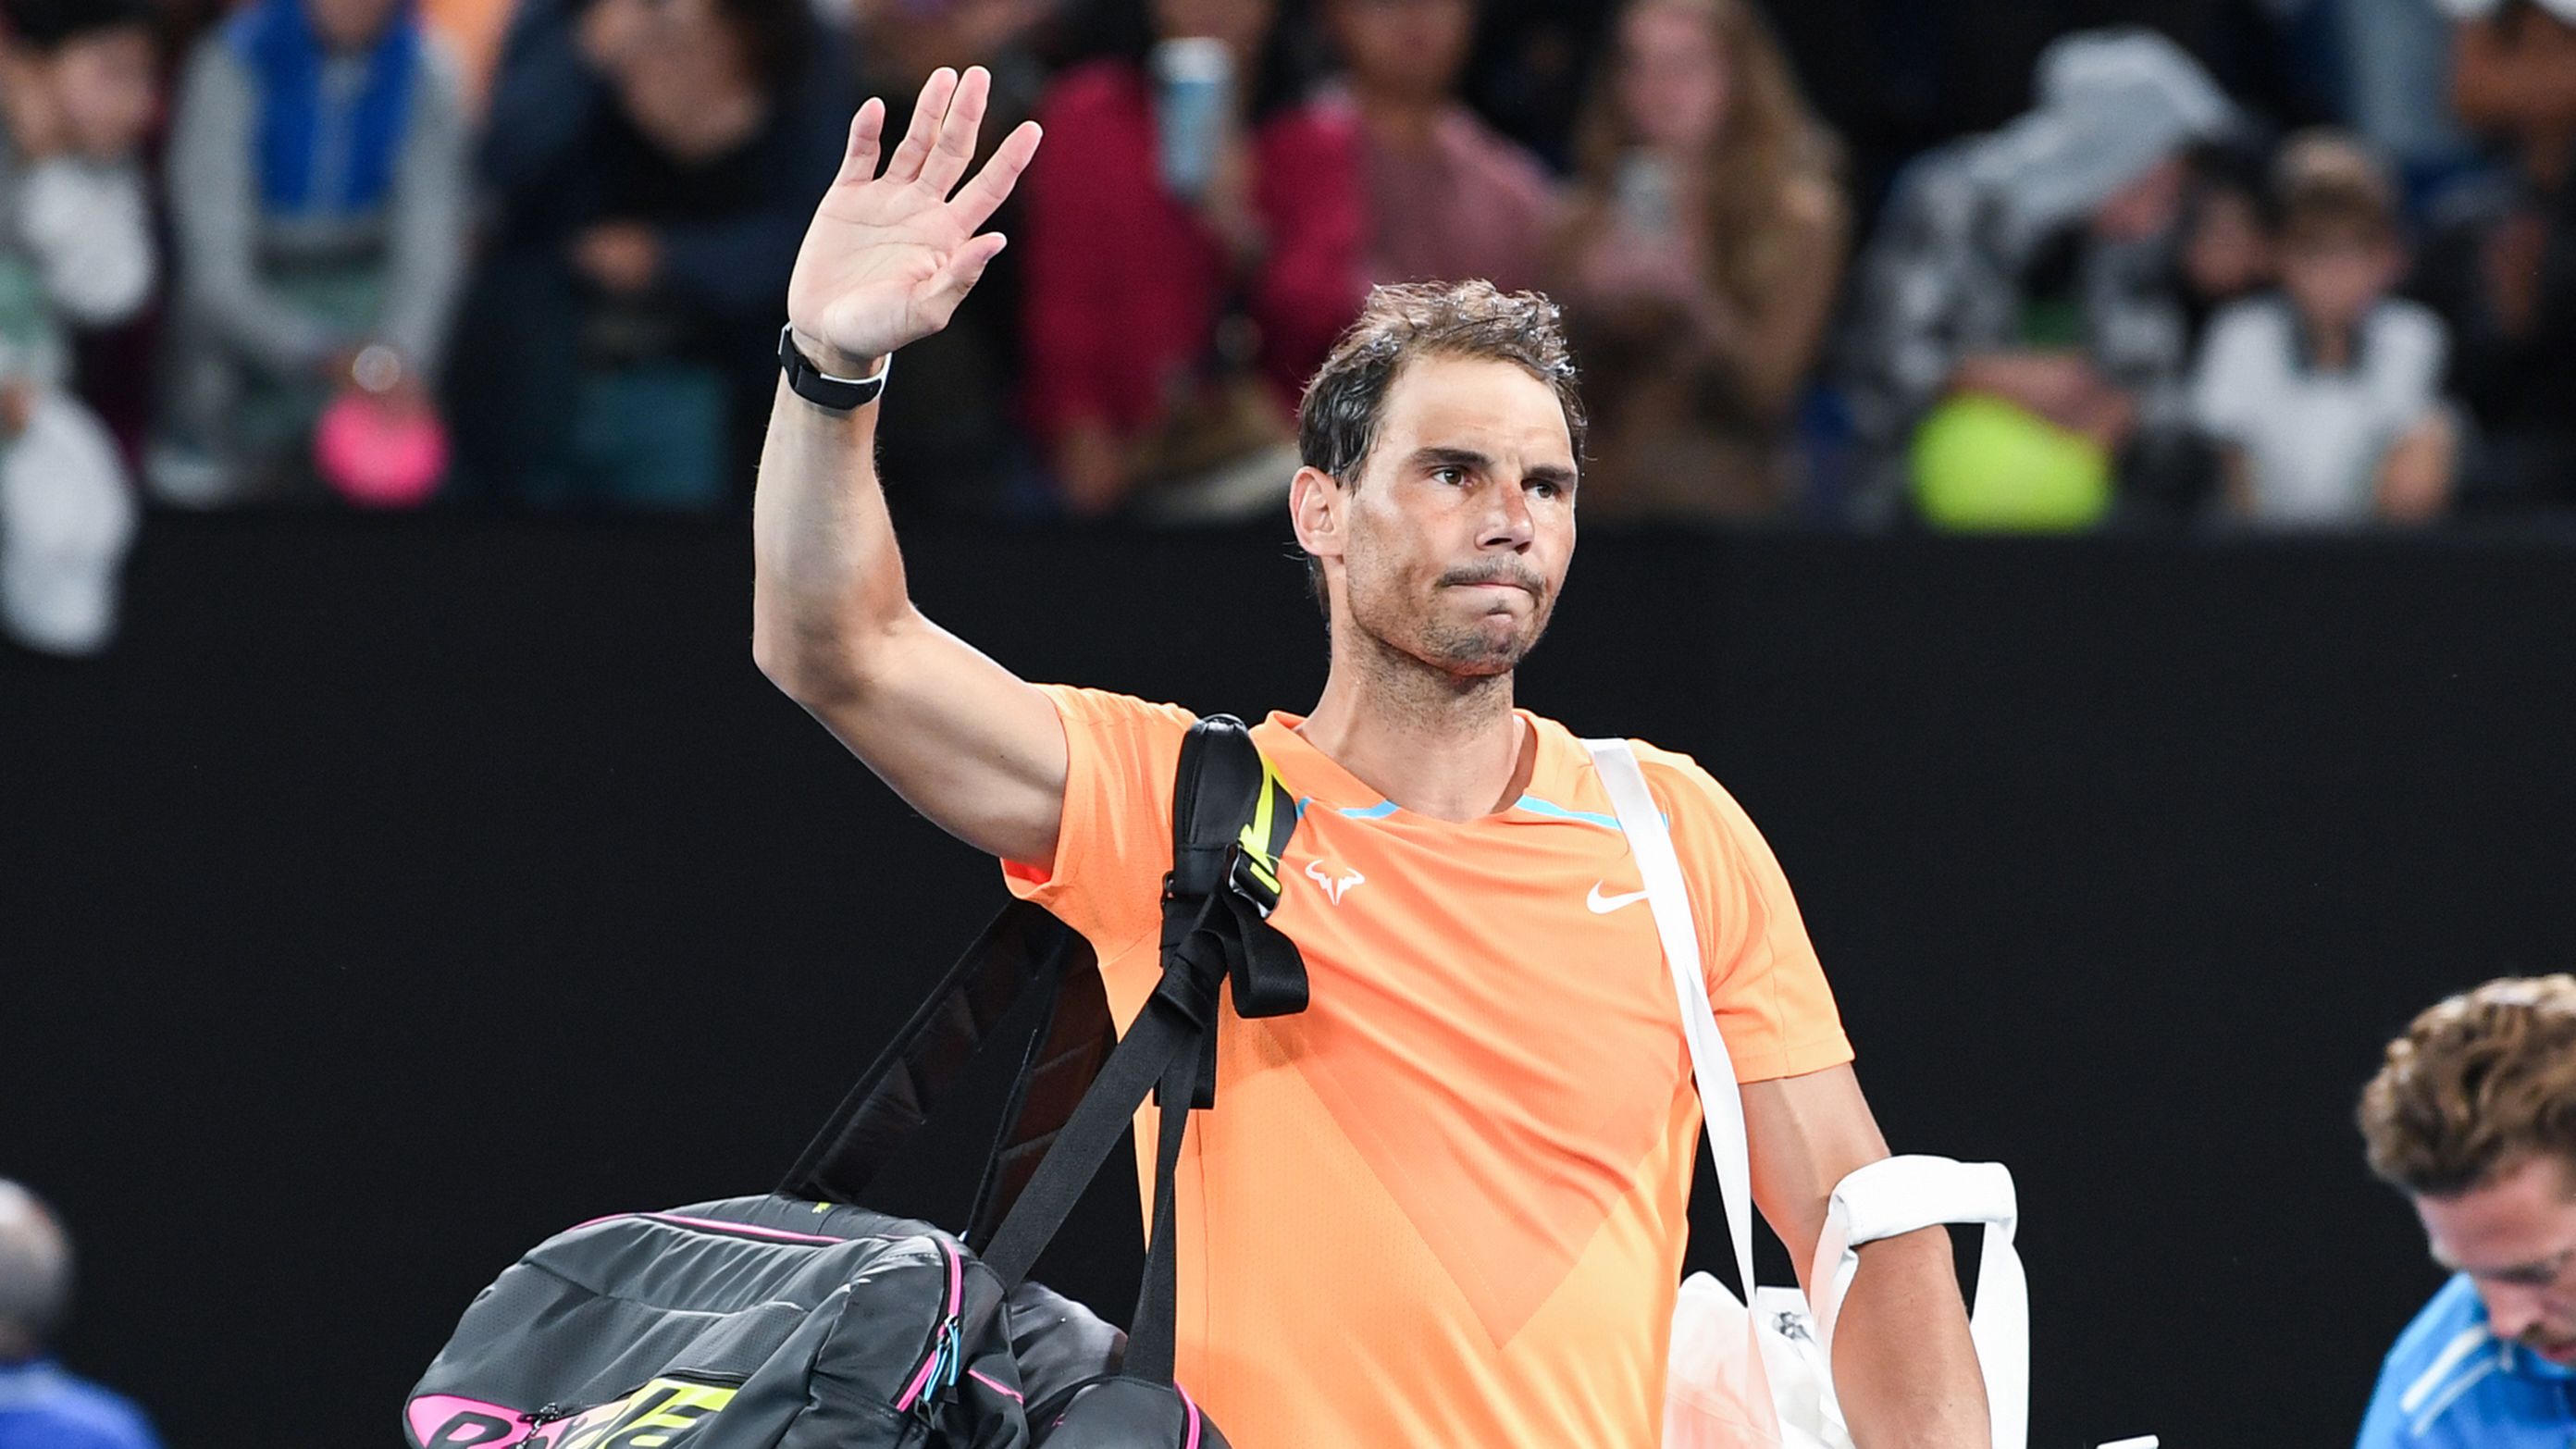 Todd Woodbridge predicts how Rafael Nadal's retirement will play out after Australian Open exit